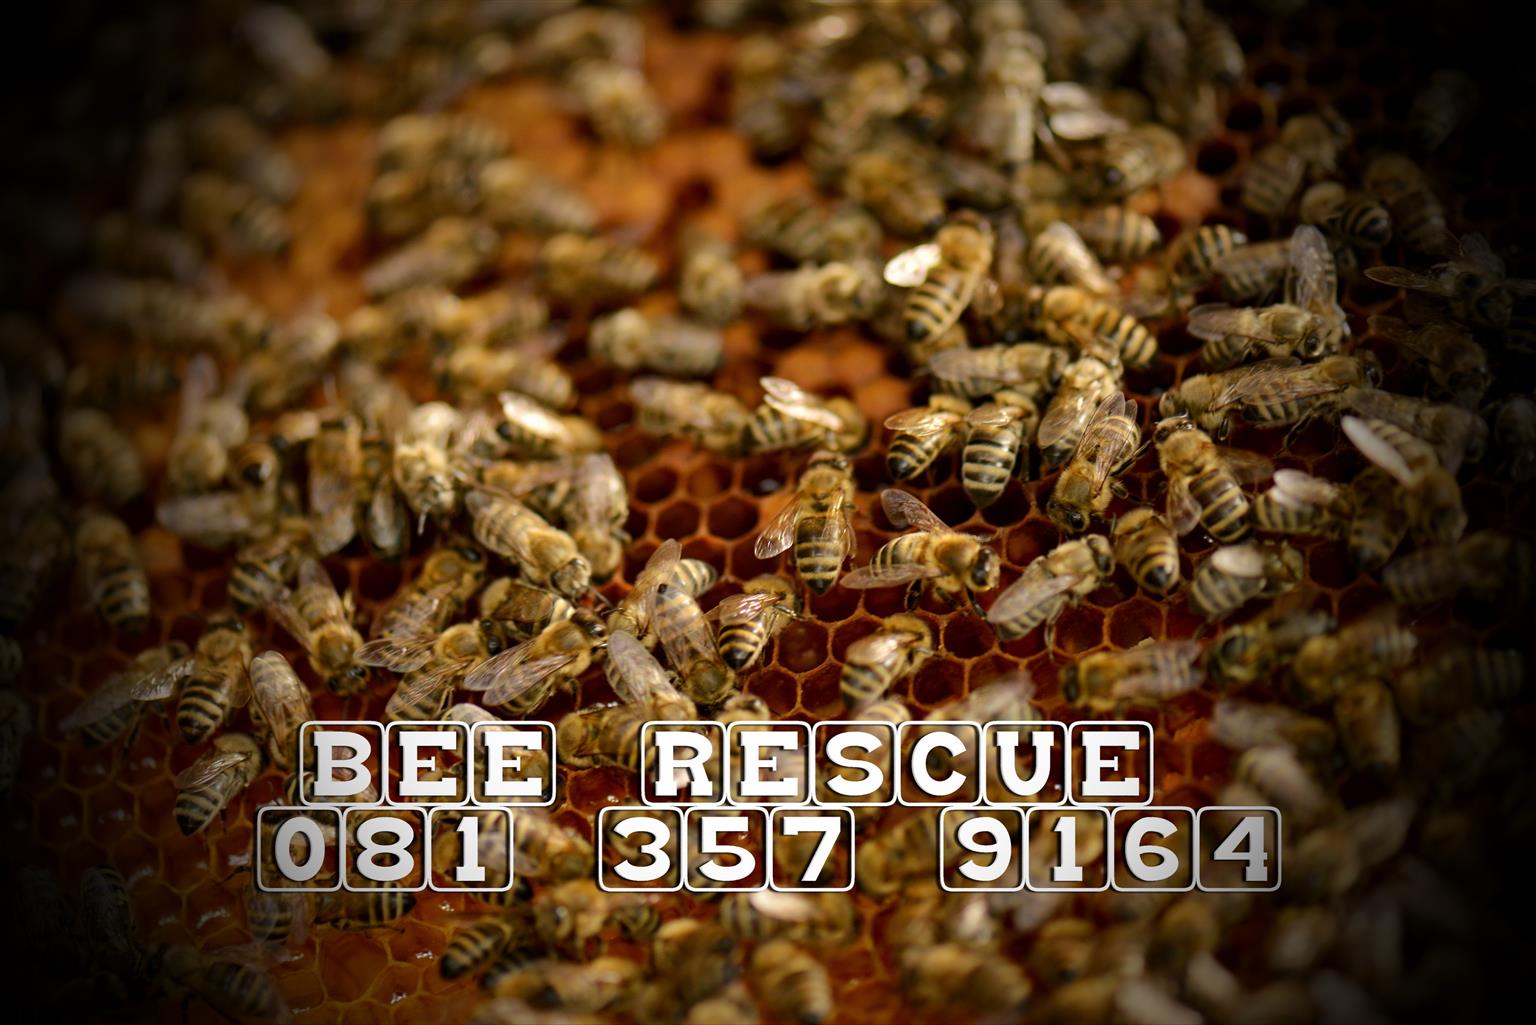 BEE RESCUE & REMOVALS